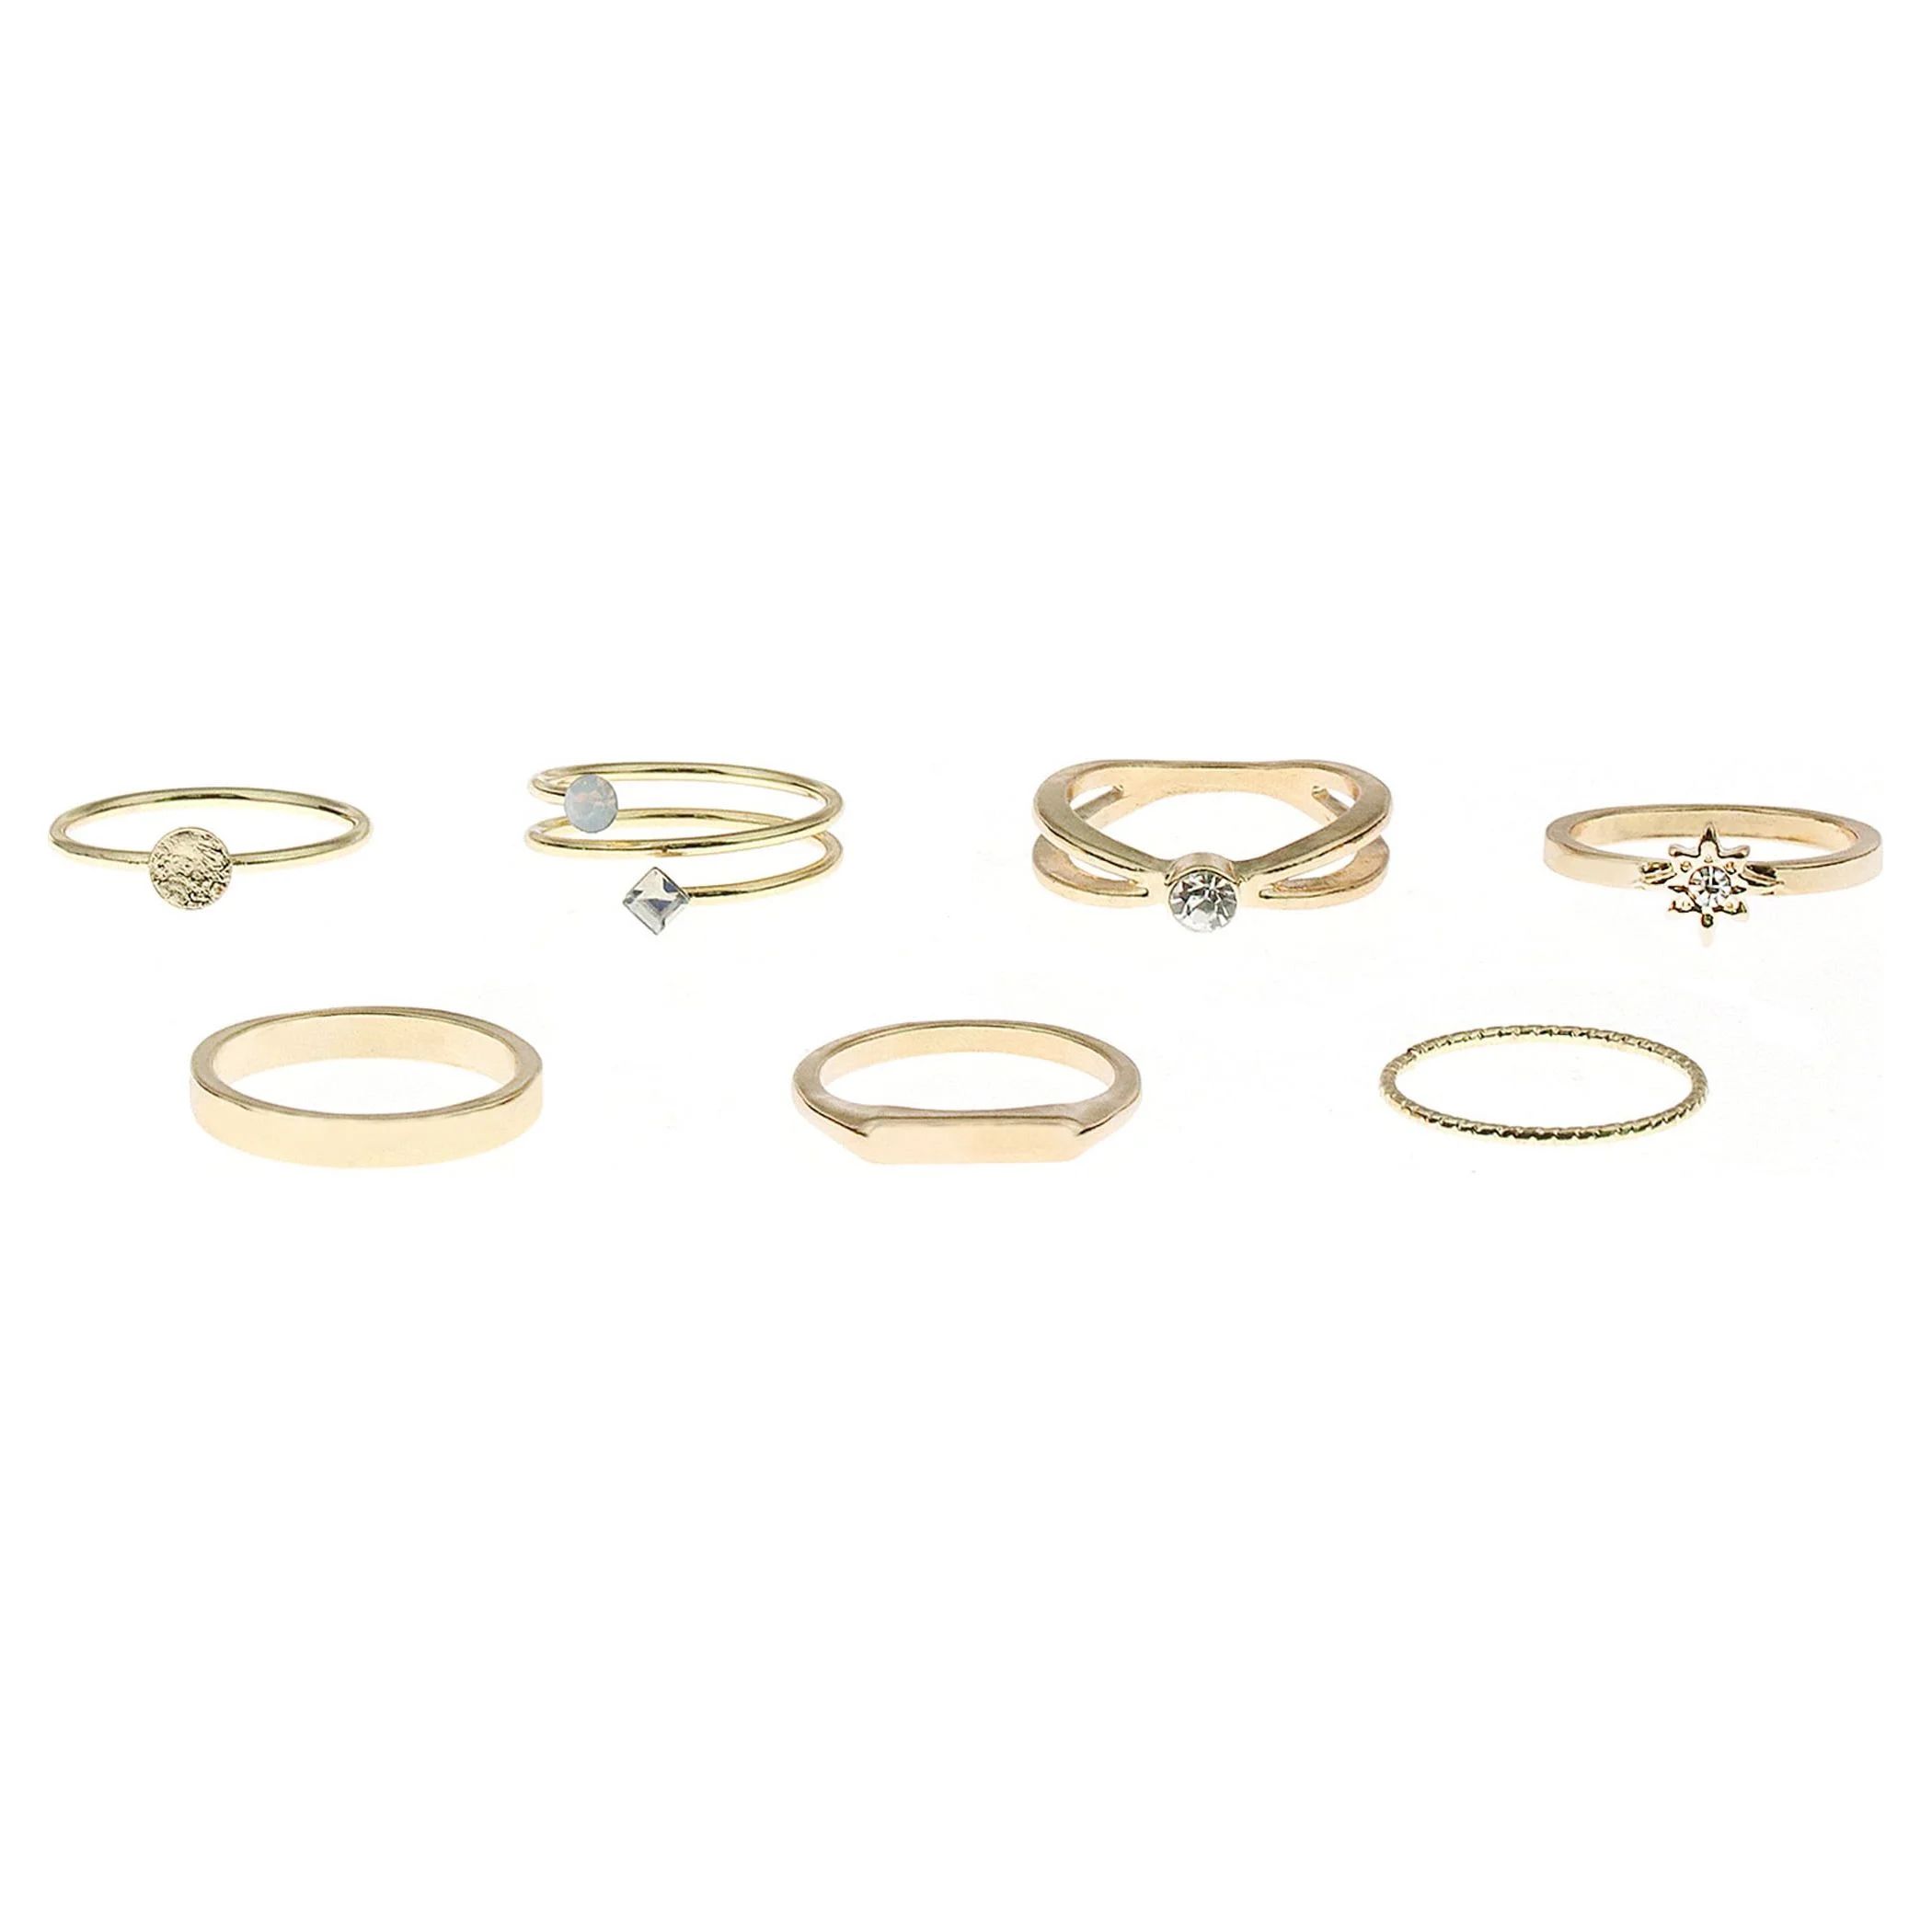 Time And Tru Ladies Gold Delicate Stacking Rings Set, 7 Pack | Walmart (US)